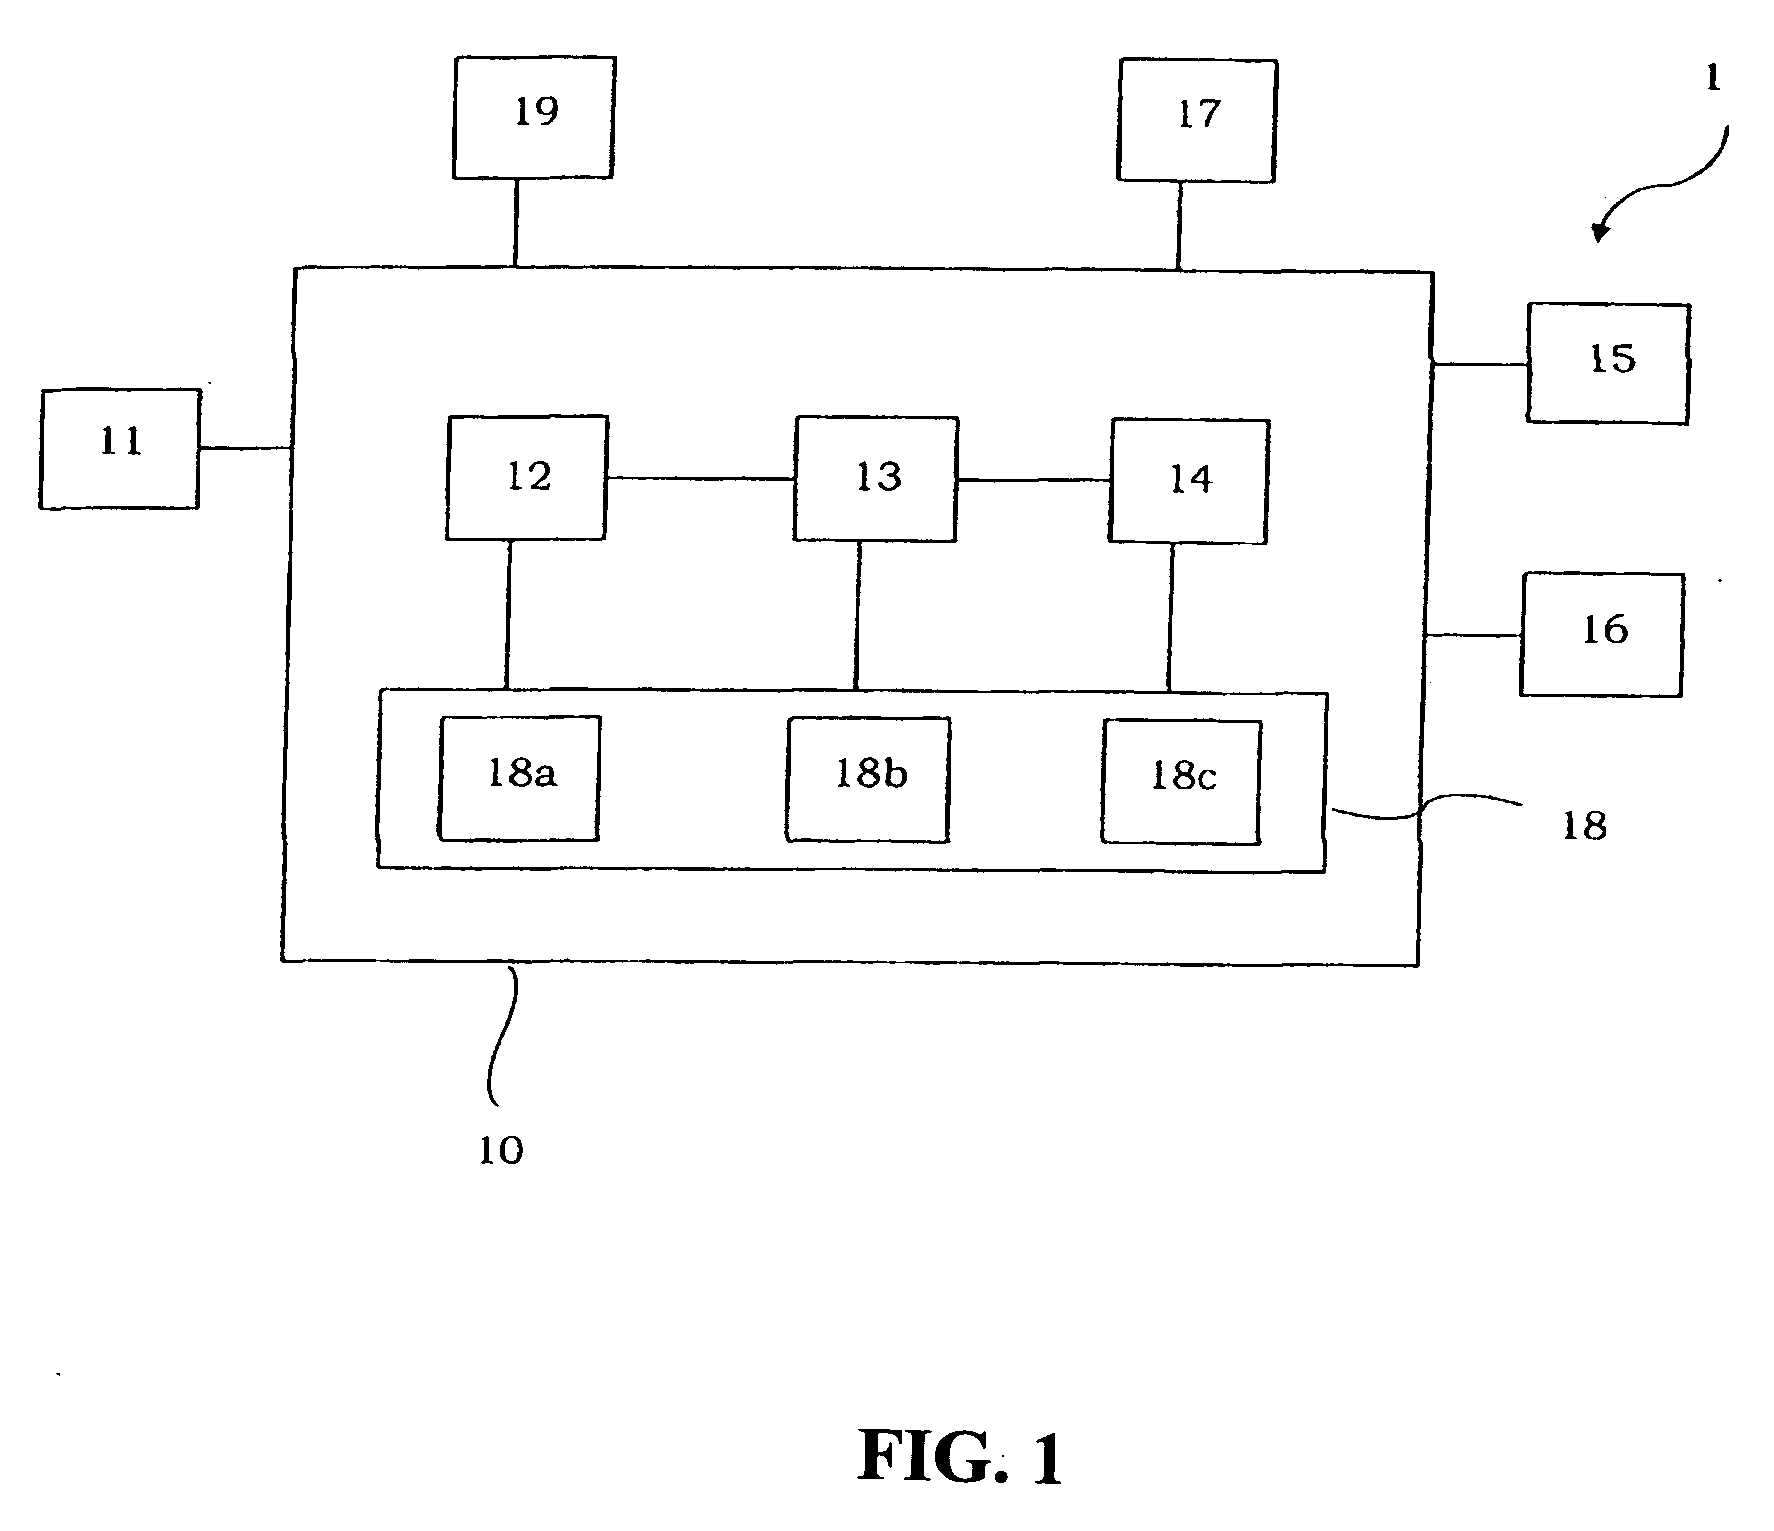 System for providing translated information to a driver of a vehicle